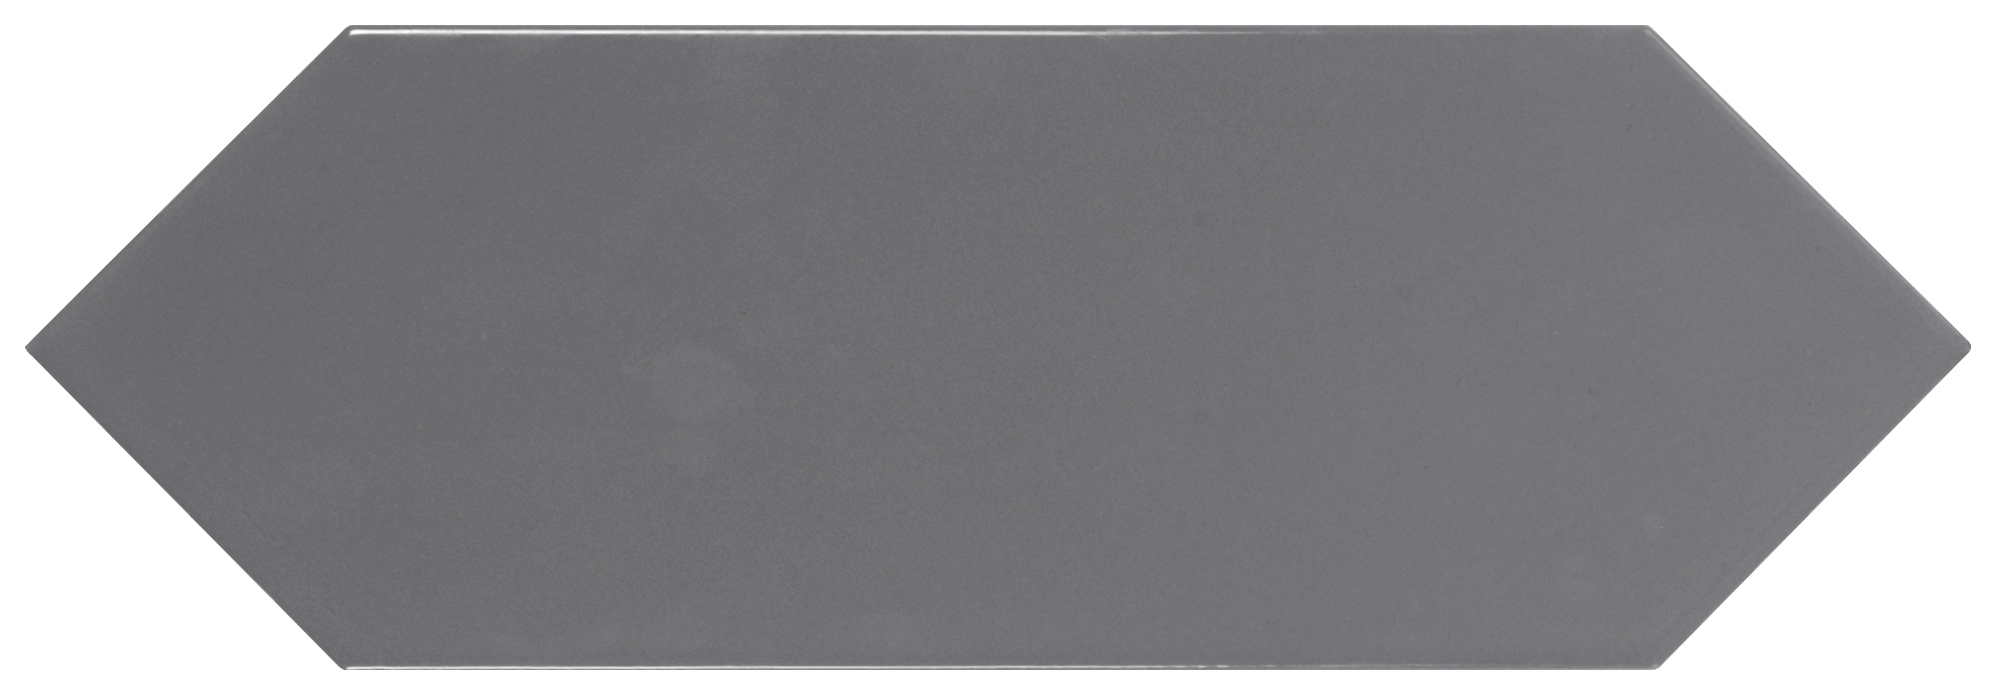 Wickes Boutique Clover Charcoal Gloss Ceramic Wall Tile - Cut Sample